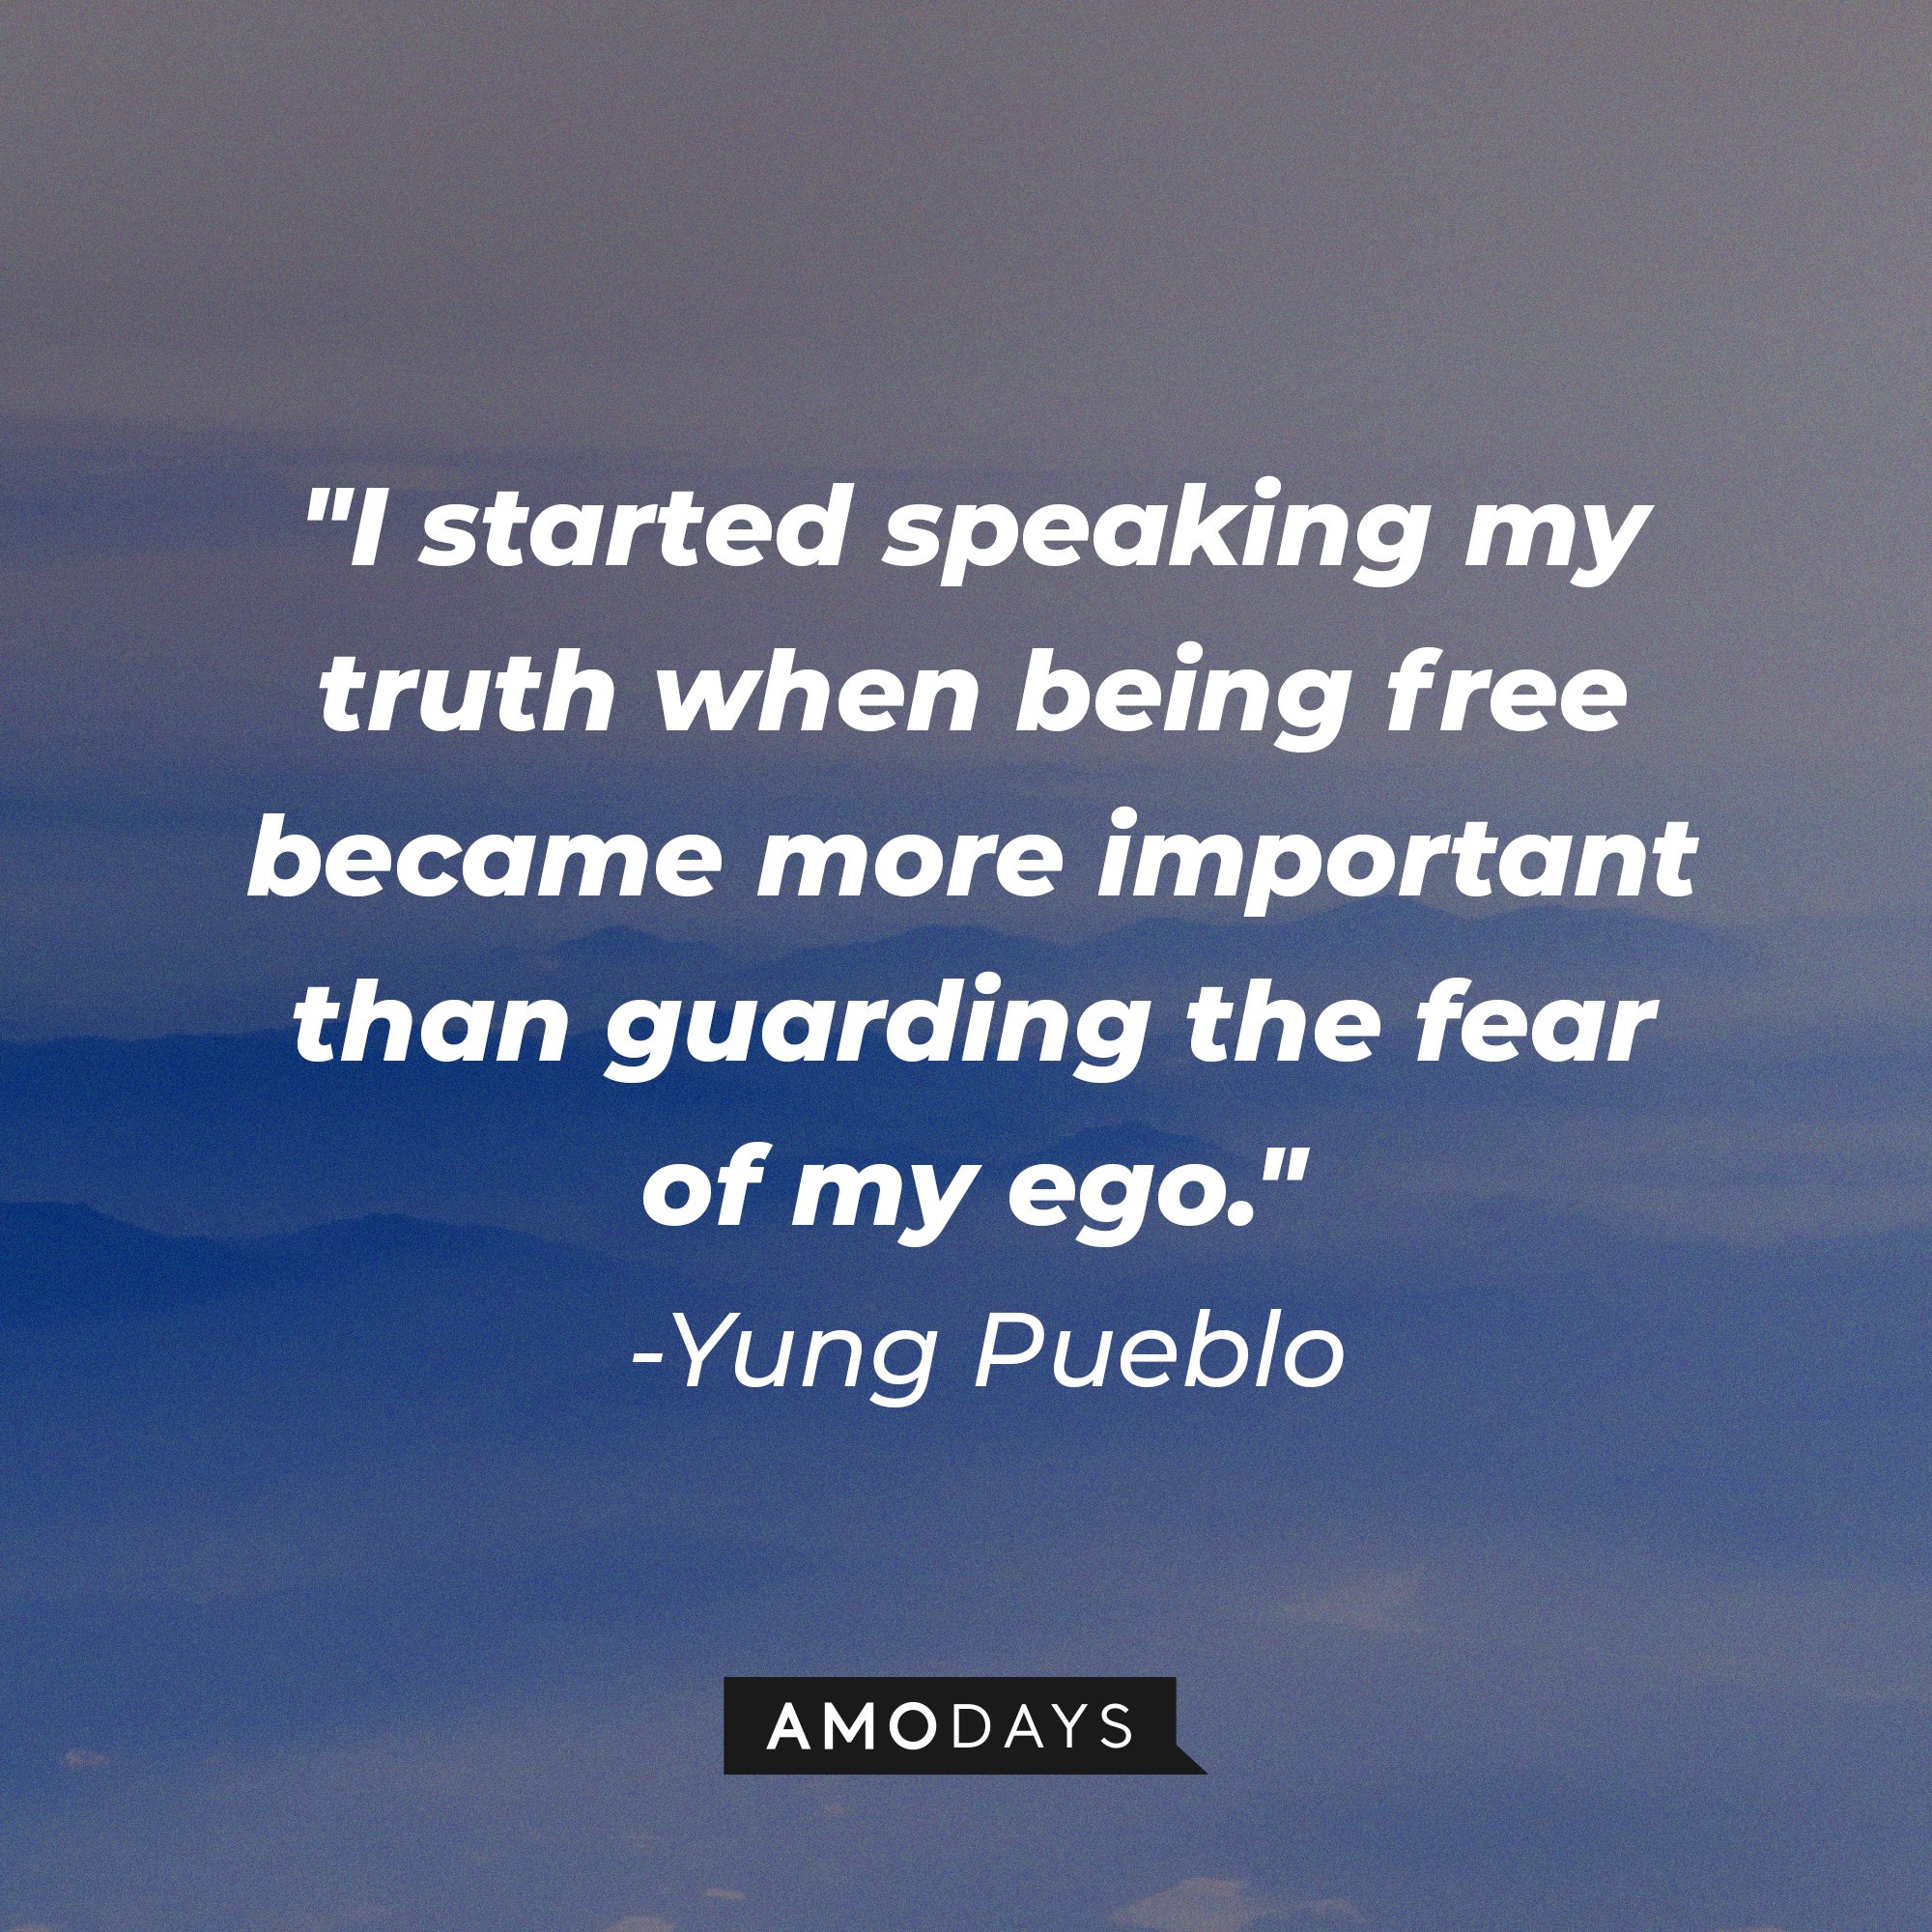 Yung Pueblo's quote "I started speaking my truth when being free became more important than guarding the fear of my ego." | Source: Unsplash.com